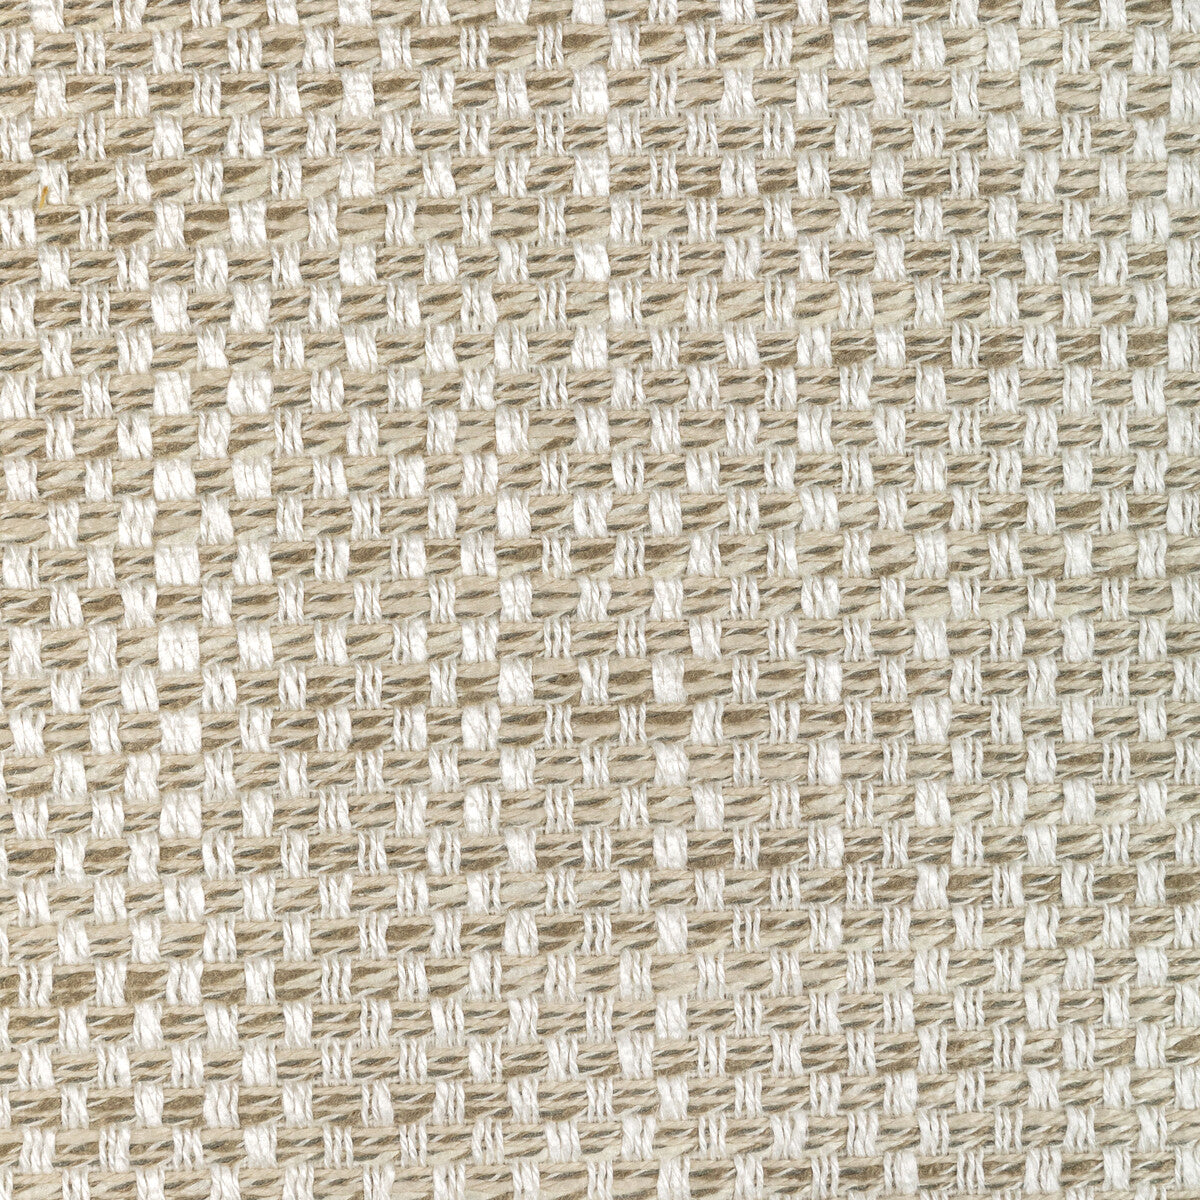 Kravet Couture fabric in 36605-161 color - pattern 36605.161.0 - by Kravet Couture in the Mabley Handler collection